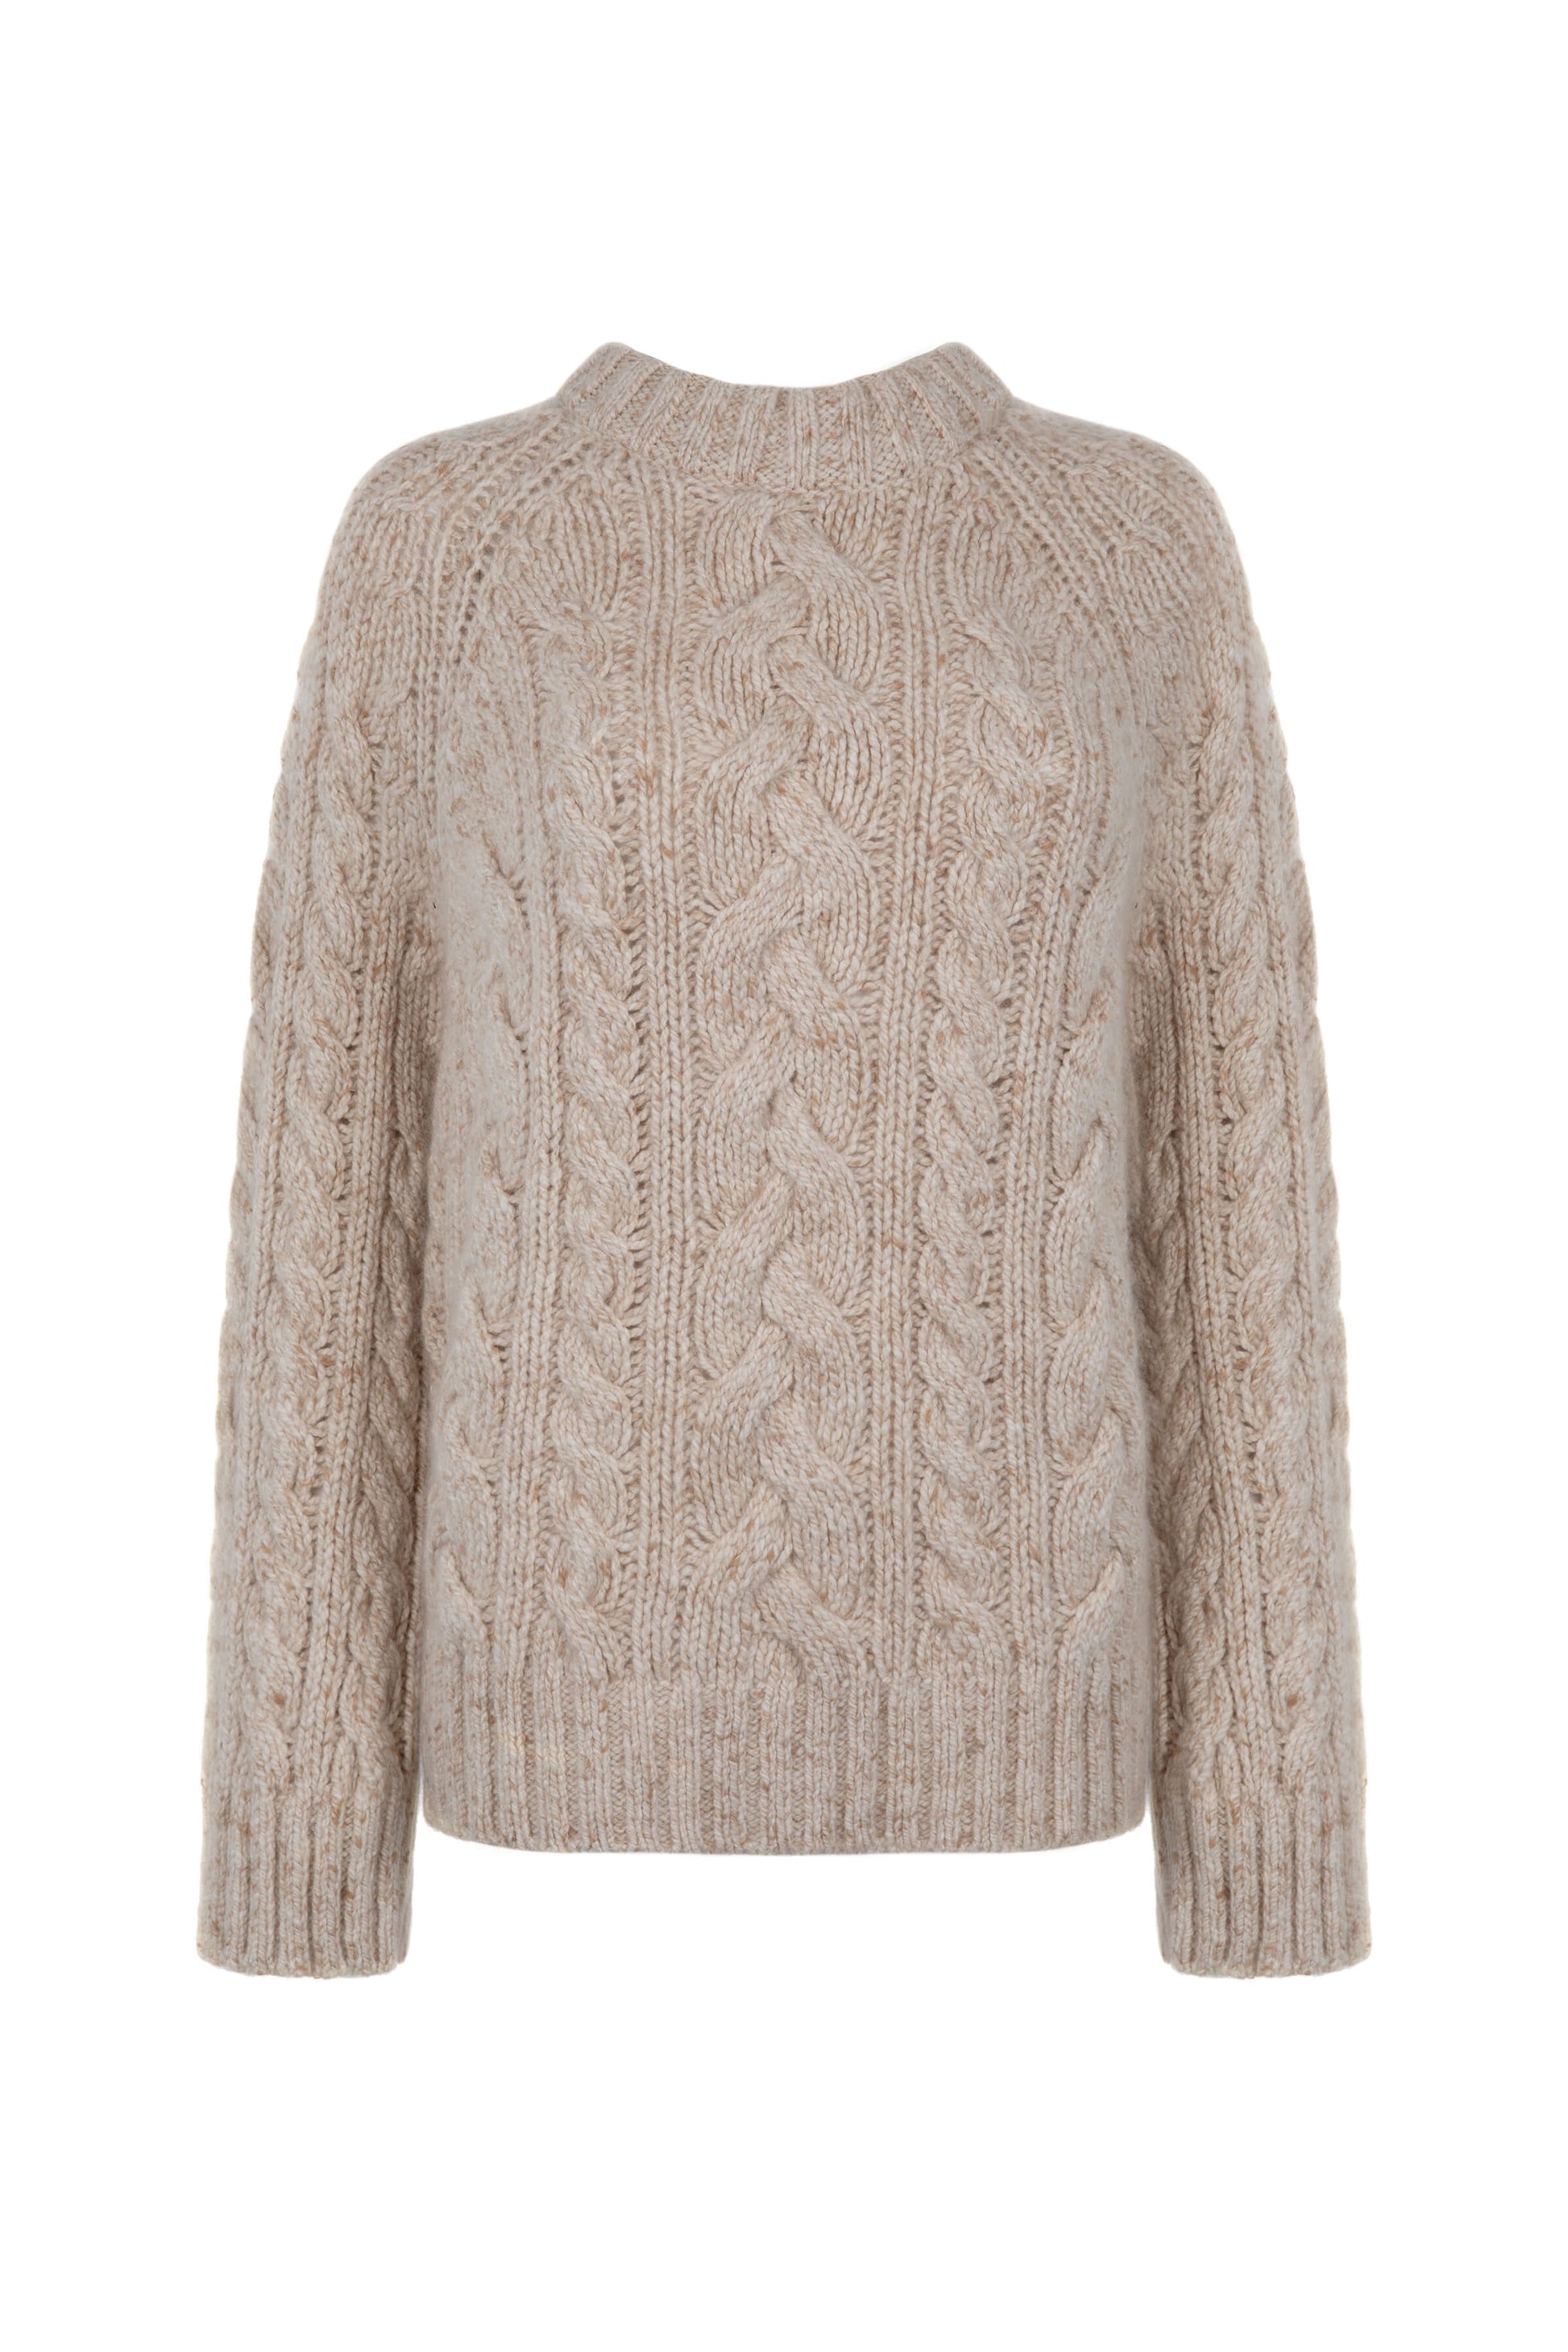 Johnstons of Elgin Womens Knitwear Light Camel Chunky Cable Donegal Cashmere Jumper KAB05092HB0209